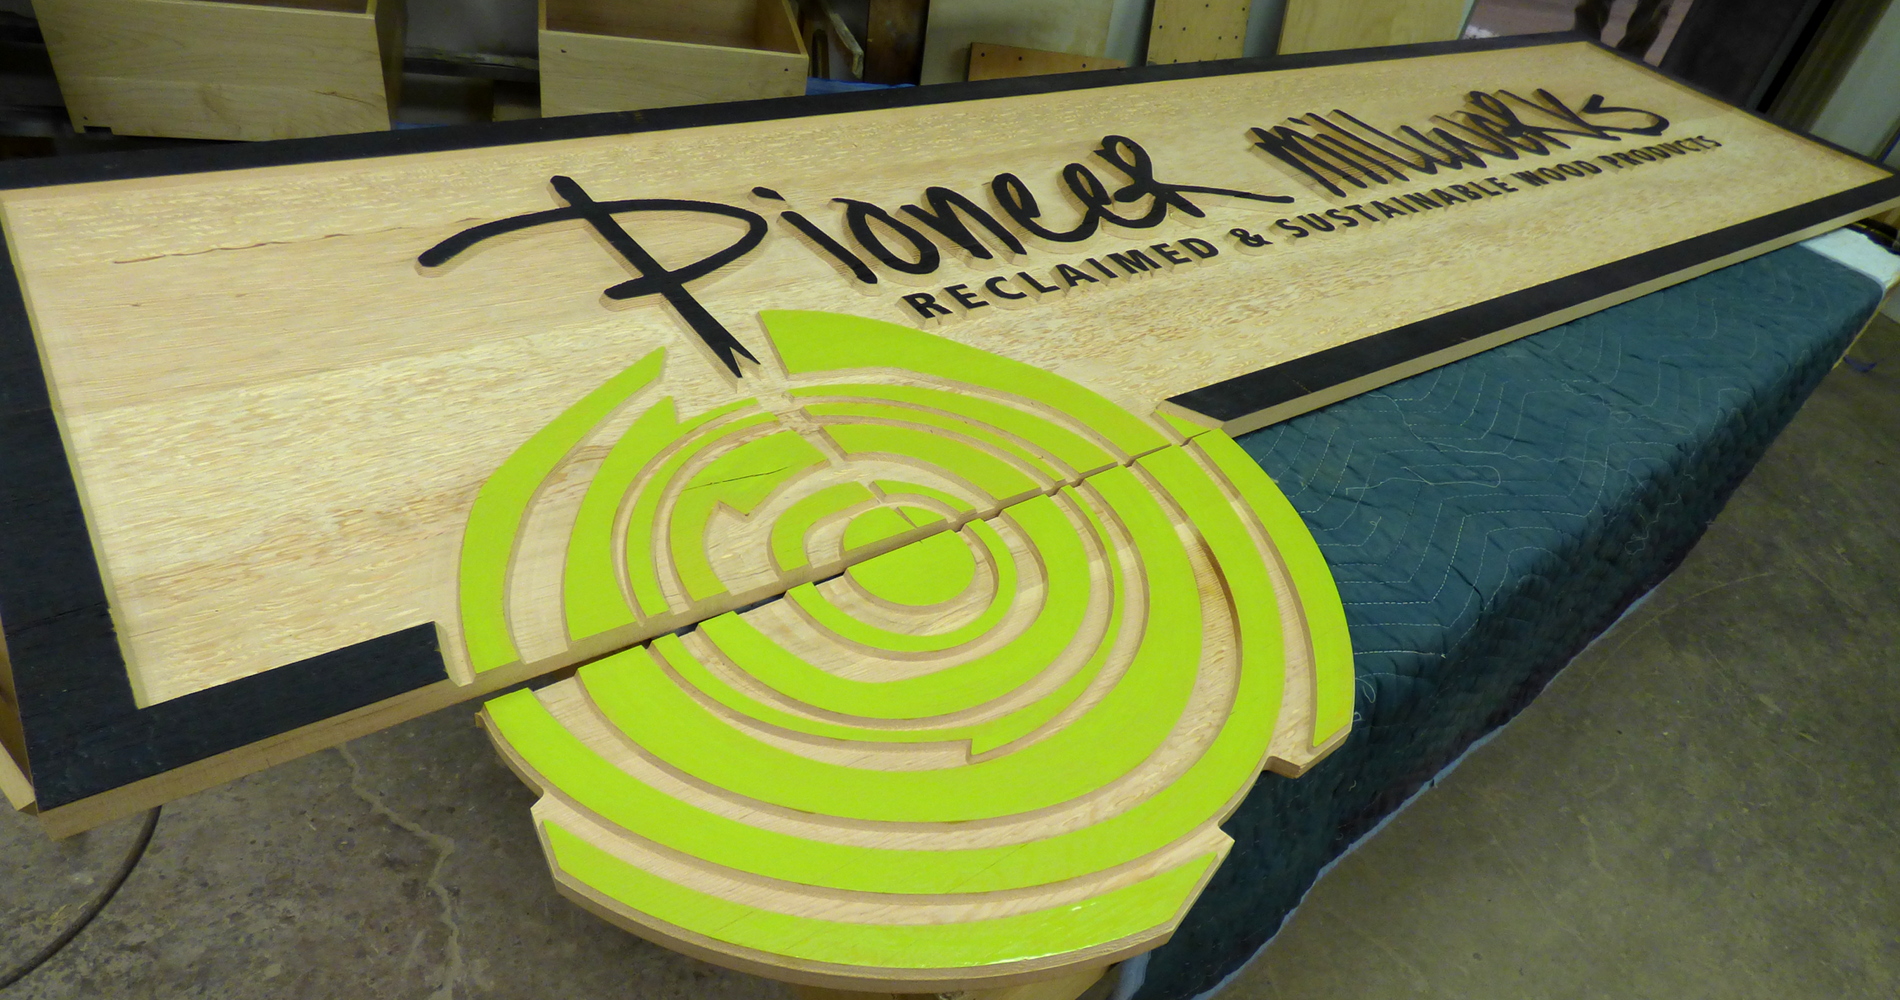 Pioneer Millworks west coast showroom sign is a perfect example of the work they can do using varied carving textures and detailed cutting to create a crisp and modern look with the CNC tool.